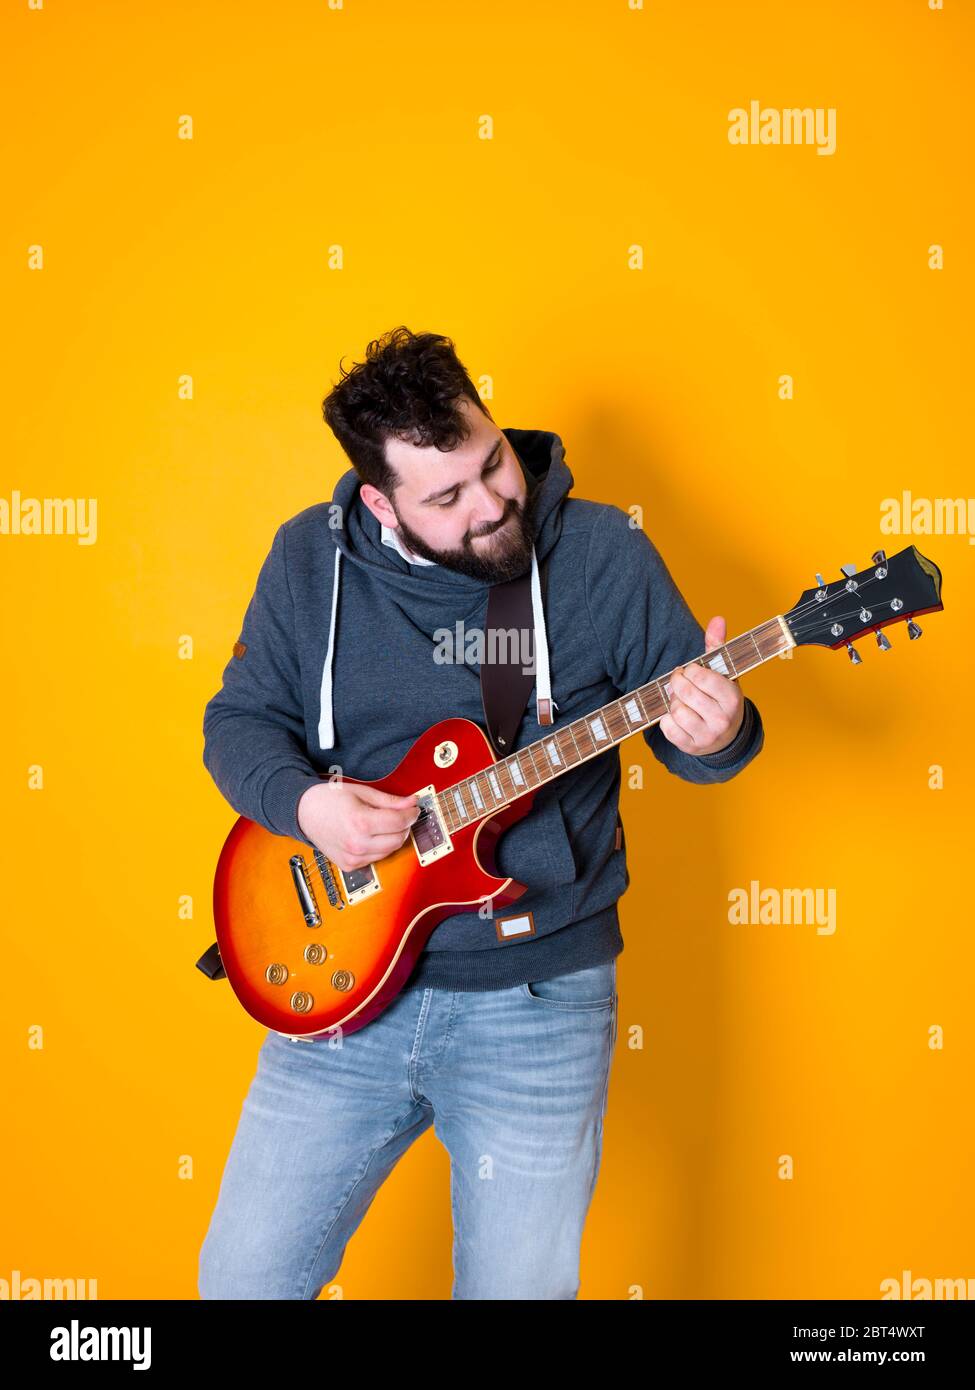 man with black hair and beard playing the electric guitar in front of a yellow background Stock Photo